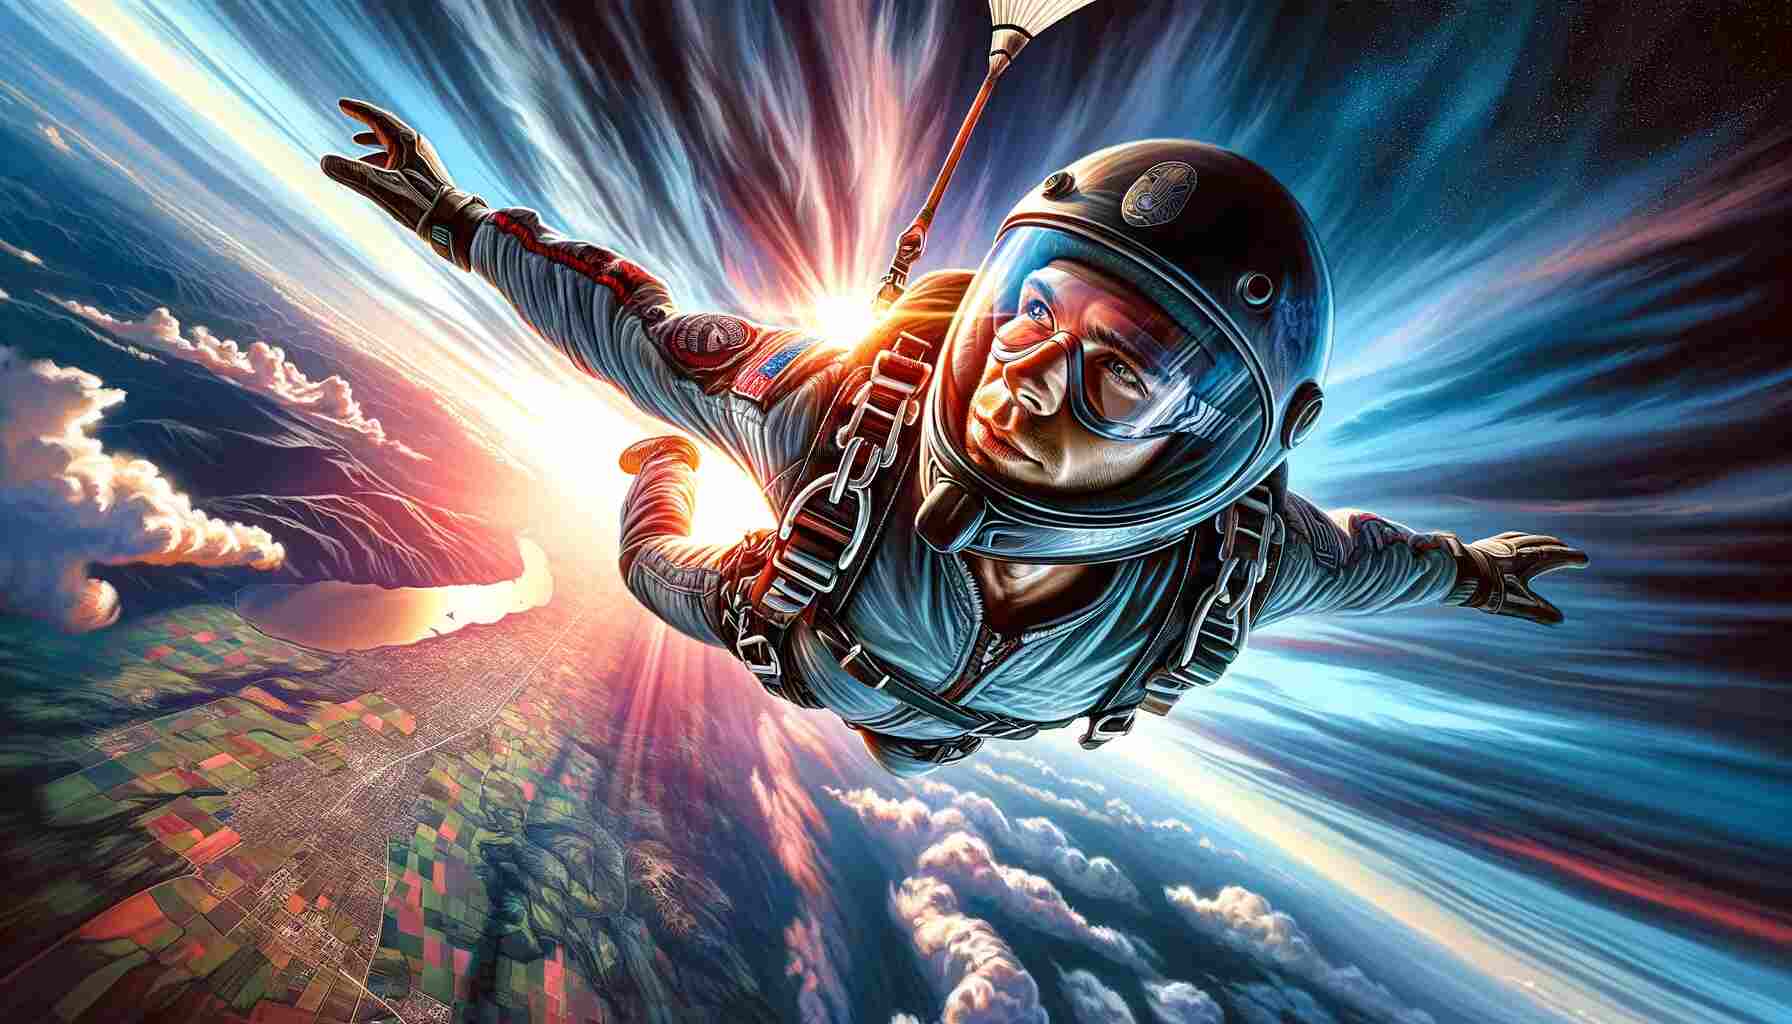 Skydiver in free fall, displaying a focused and exhilarated expression. They are wearing a detailed skydiving suit and helmet, with a partially deployed parachute visible. The background features a high-altitude view of the sky blending into the horizon, with the earth far below.